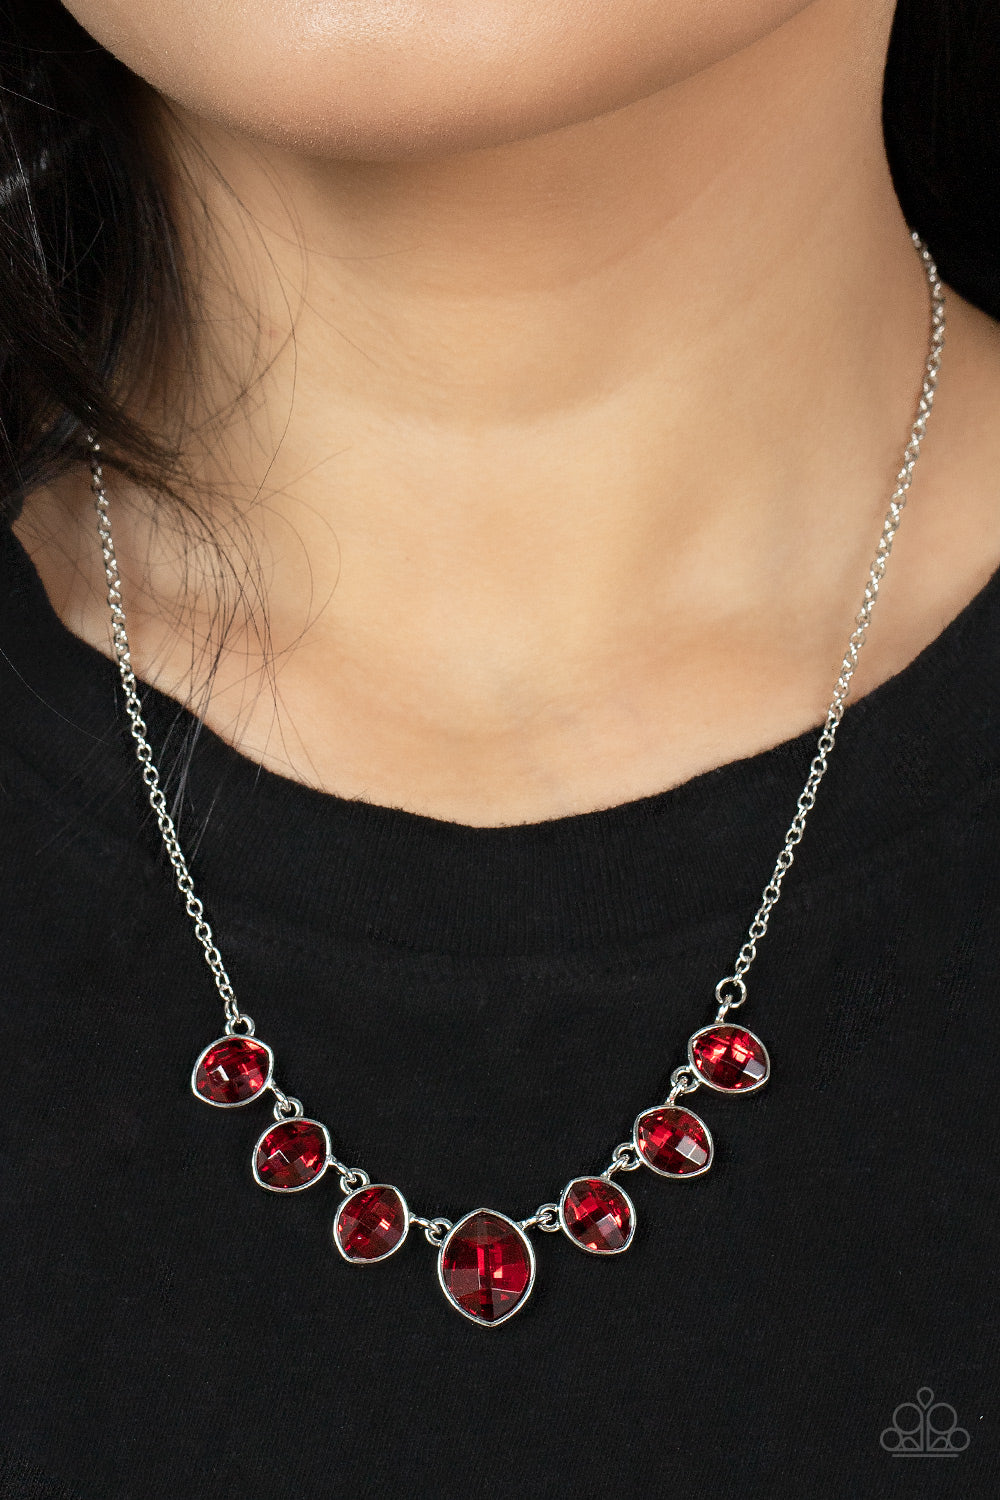 Material Girl Glamour - Red Necklaces encased in sleek silver fittings, elegant cut fiery red rhinestones delicately connect below the collar. An oversized red rhinestone adorns to the middle of the glittery strand, creating a sparkly centerpiece. Features an adjustable clasp closure.  Sold as one individual necklace. Includes one pair of matching earrings.  Paparazzi Jewelry is lead and nickel free so it's perfect for sensitive skin too!